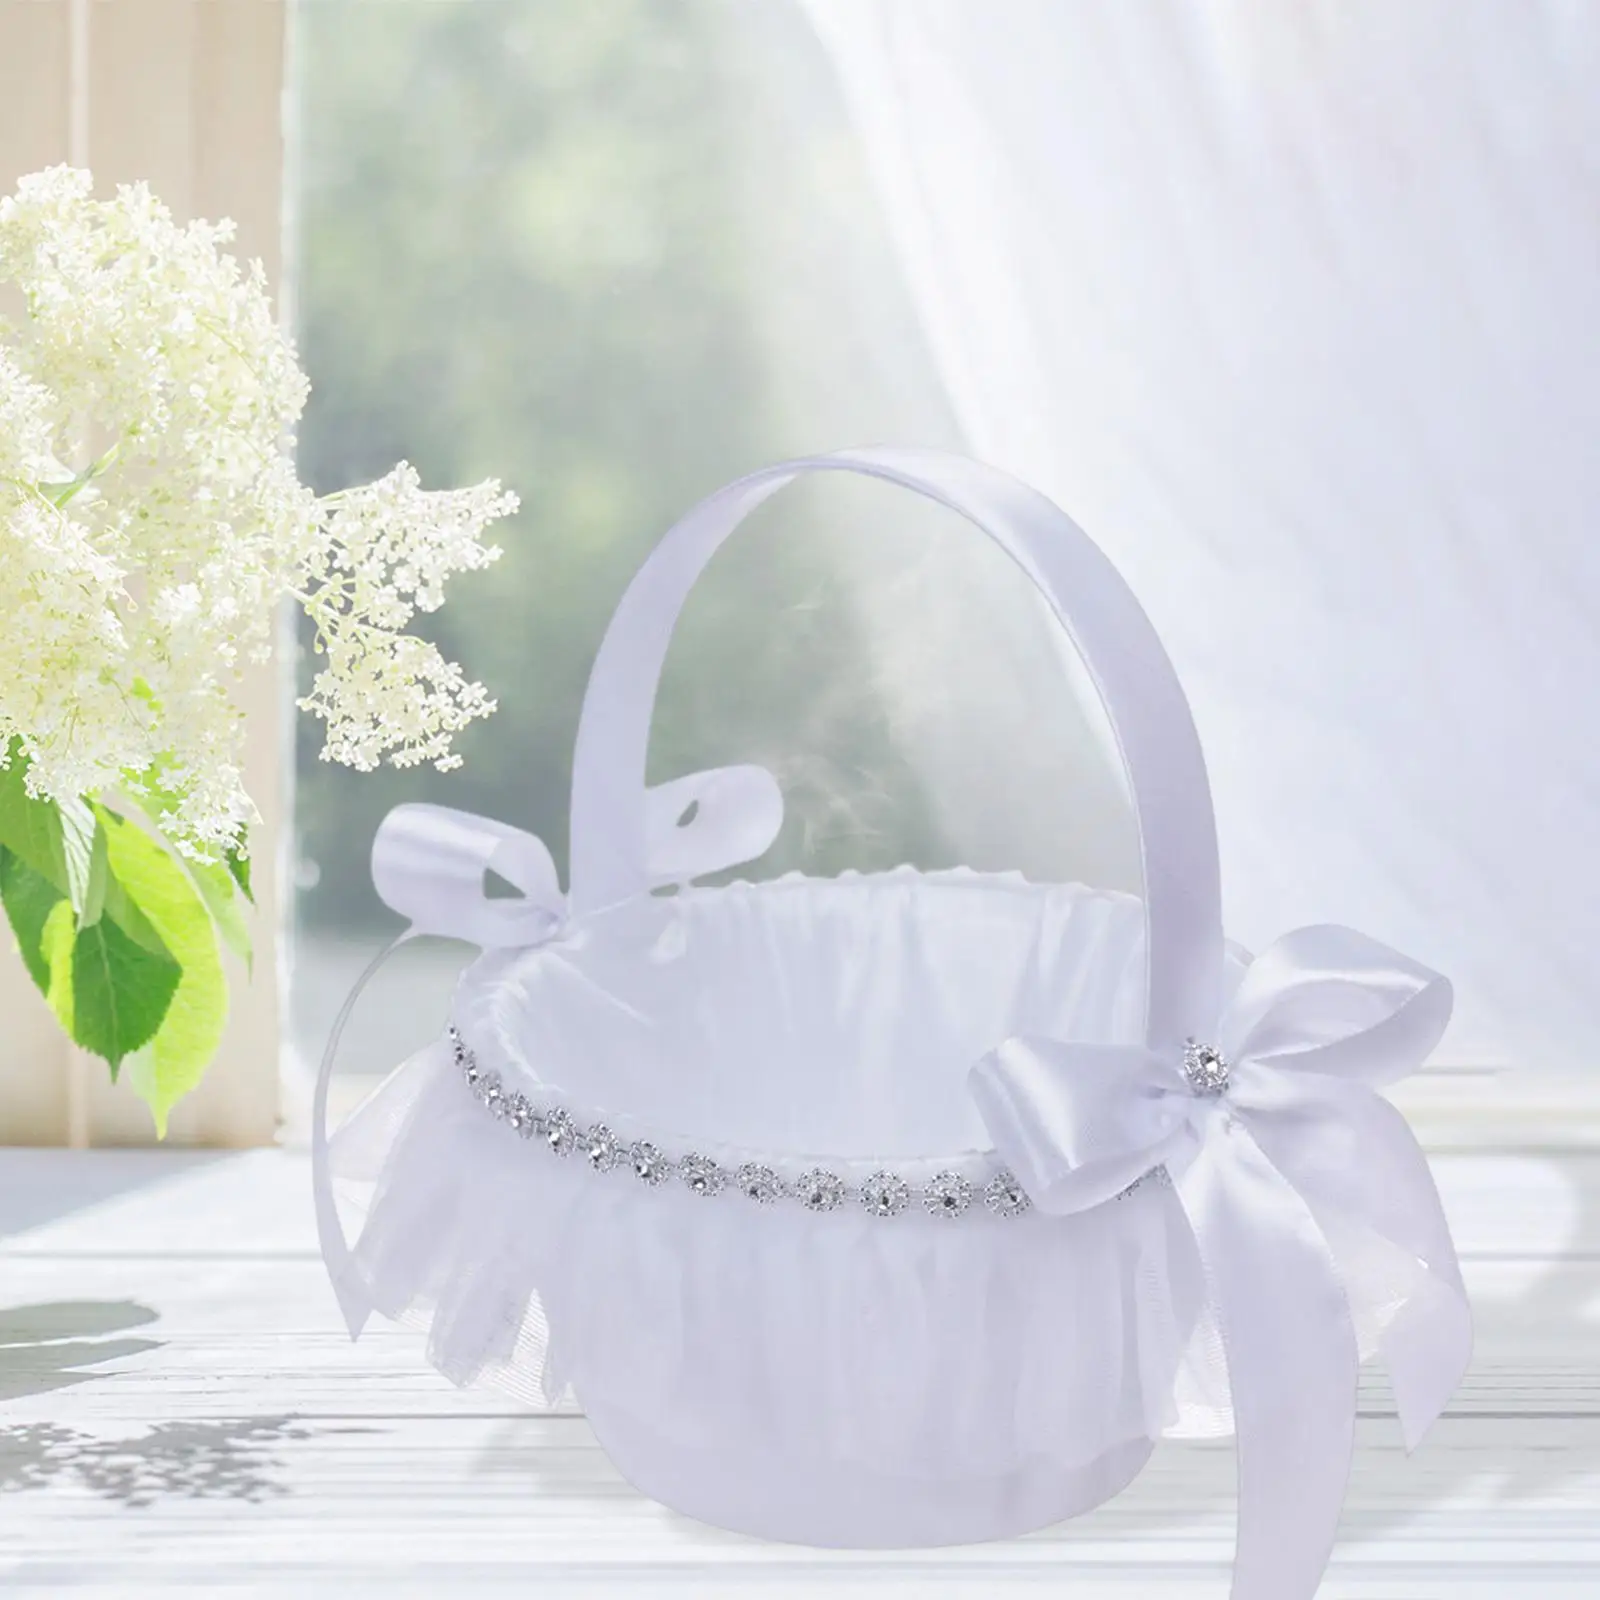 European Style Wedding Flower Girl Basket Fruit Candies Container Comfortable Handle for Events Centerpiece Decoration Ornament